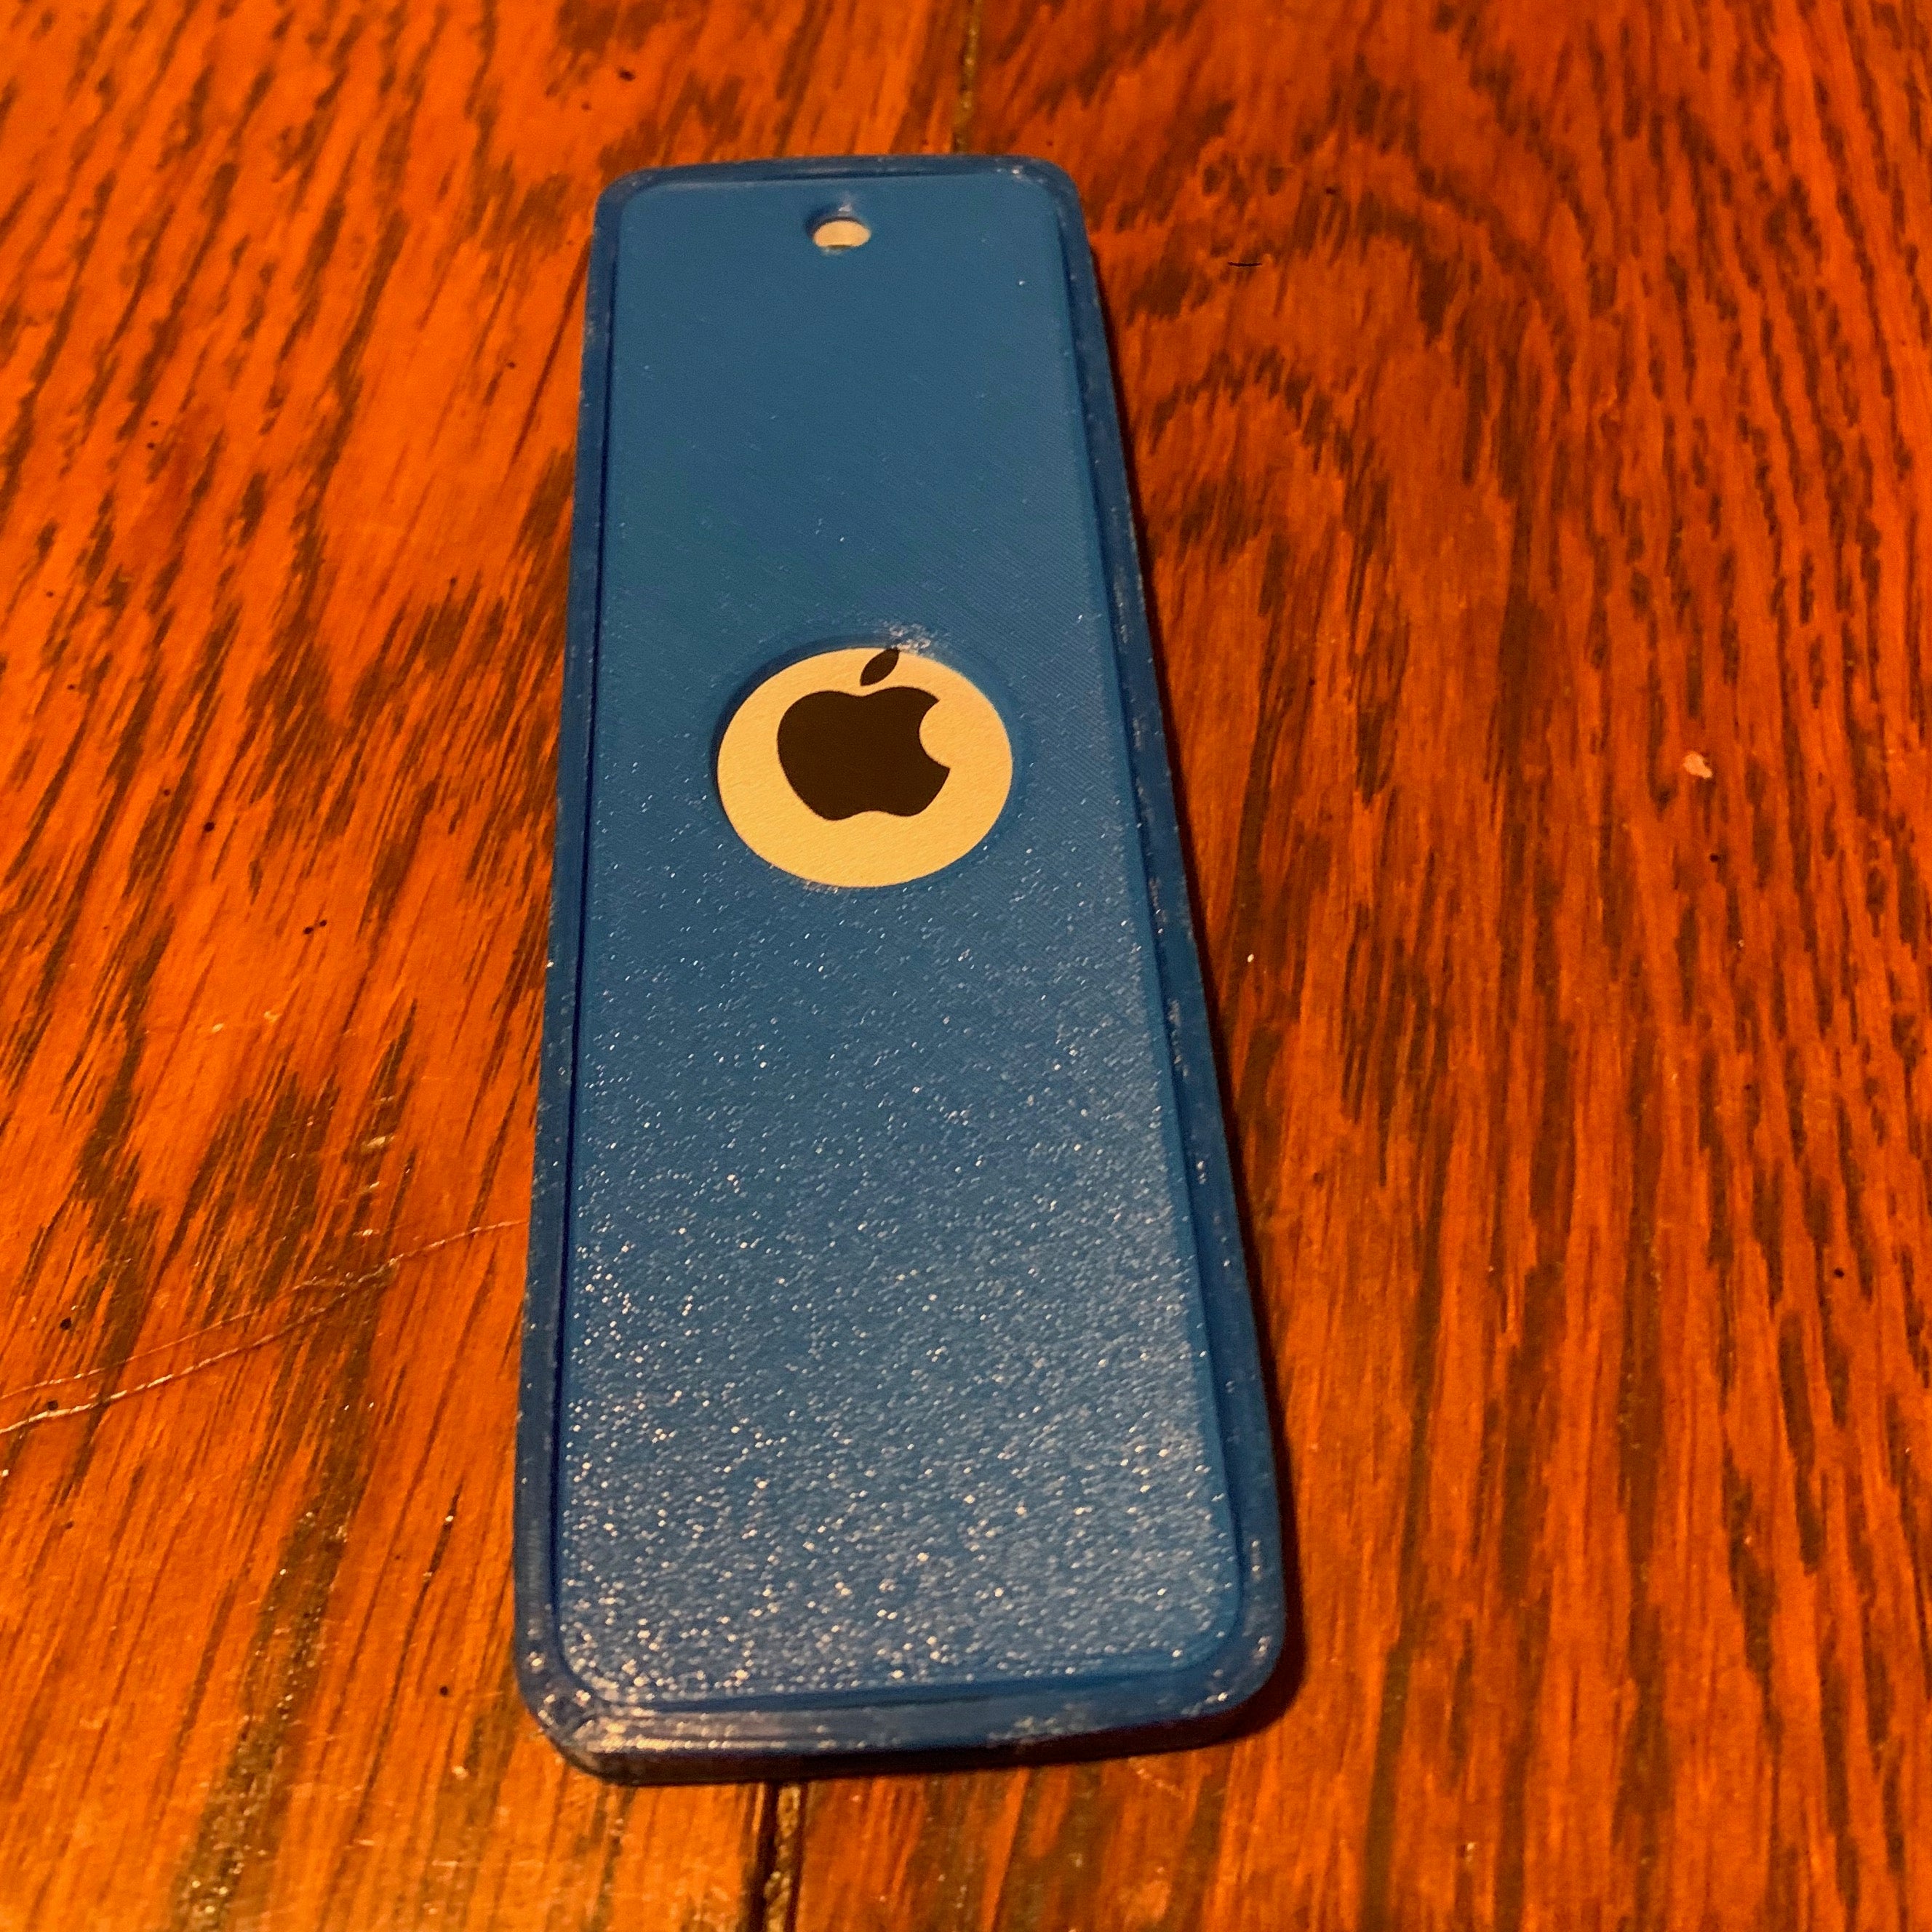 Apple TV remote control case in two parts